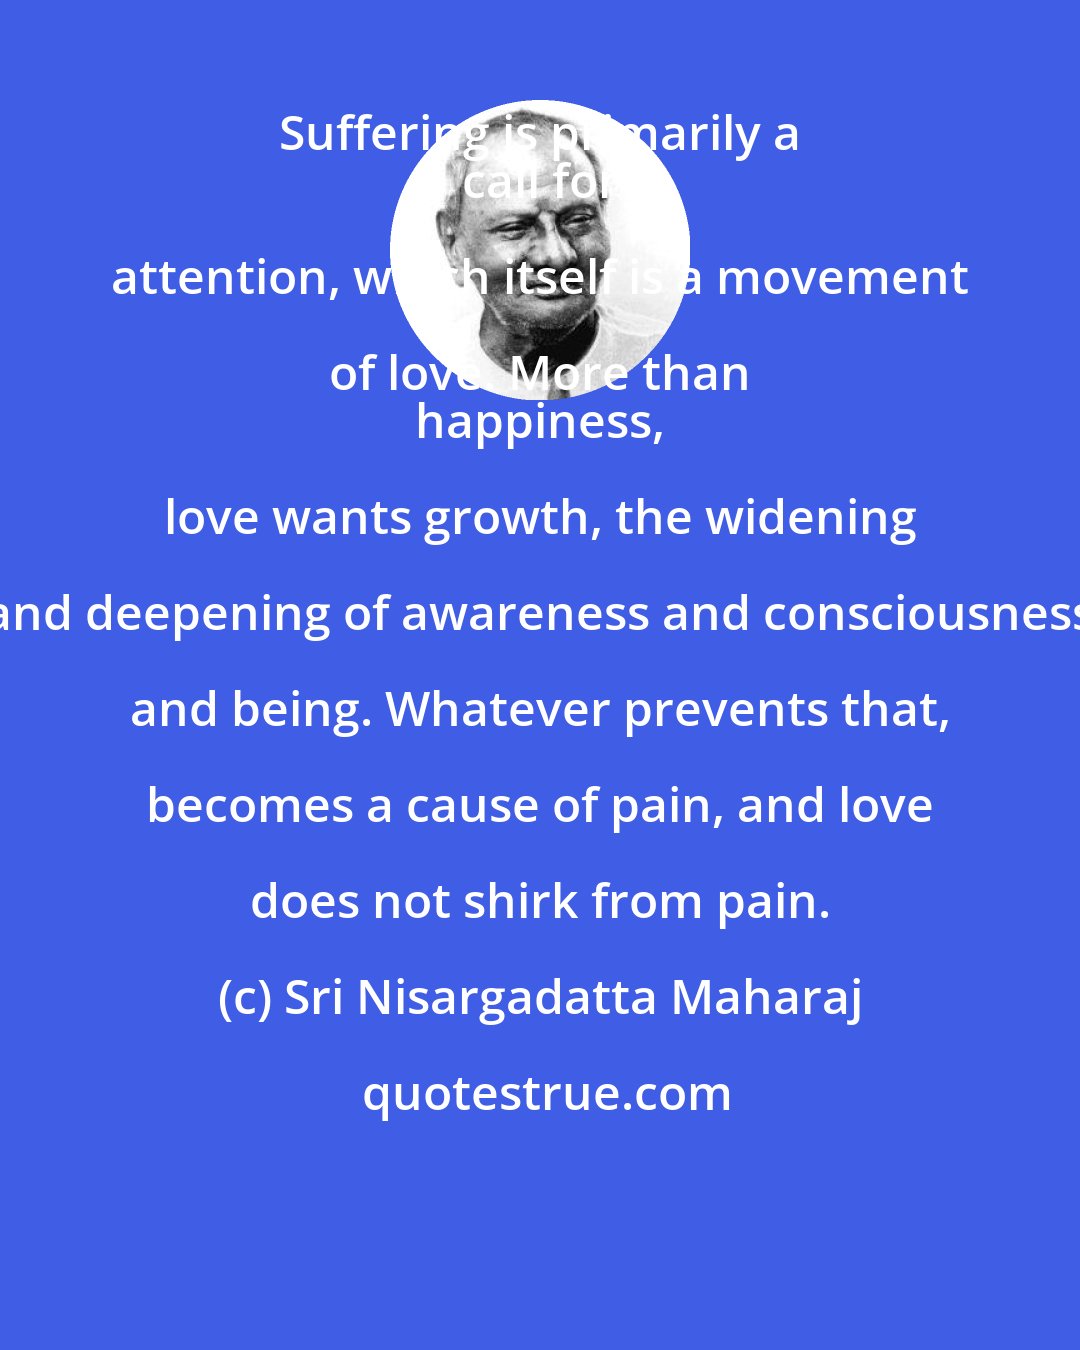 Sri Nisargadatta Maharaj: Suffering is primarily a 
 call for attention, which itself is a movement of love. More than 
 happiness, love wants growth, the widening and deepening of awareness and consciousness and being. Whatever prevents that, becomes a cause of pain, and love does not shirk from pain.